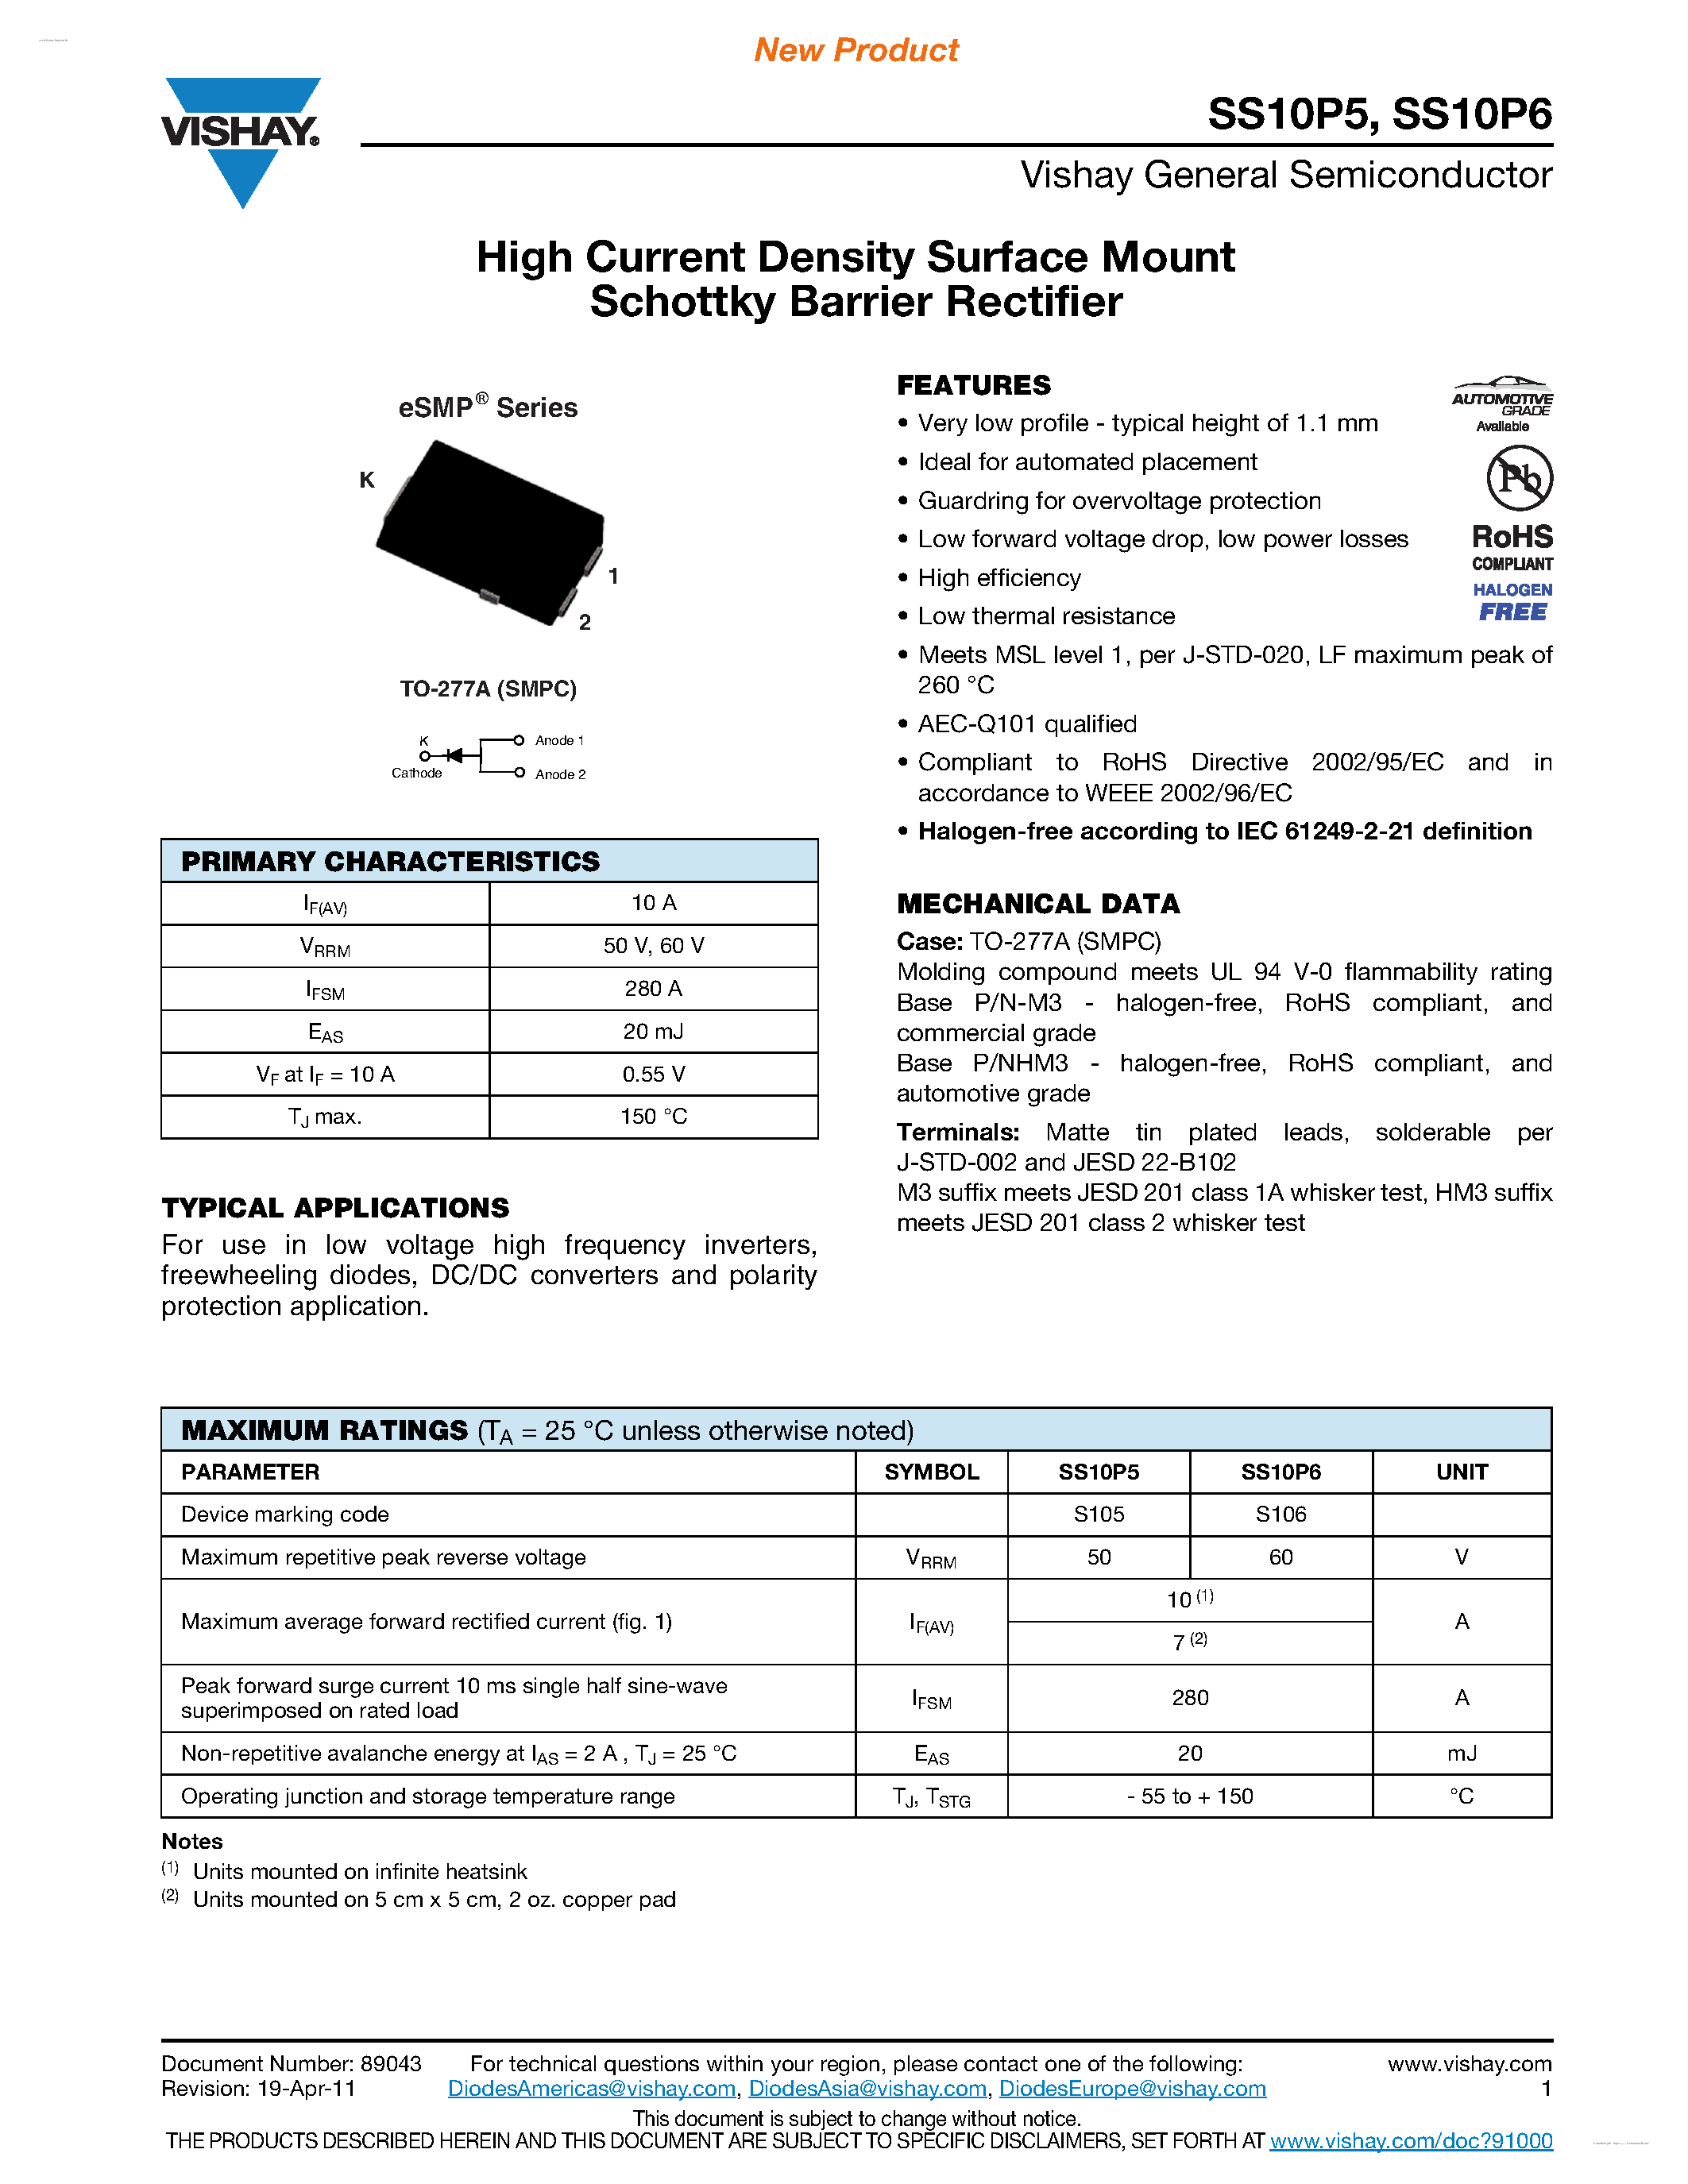 Даташит SS10P5 - (SS10P5 / SS10P6) High Current Density Surface Mount Schottky Barrier Rectifier страница 1